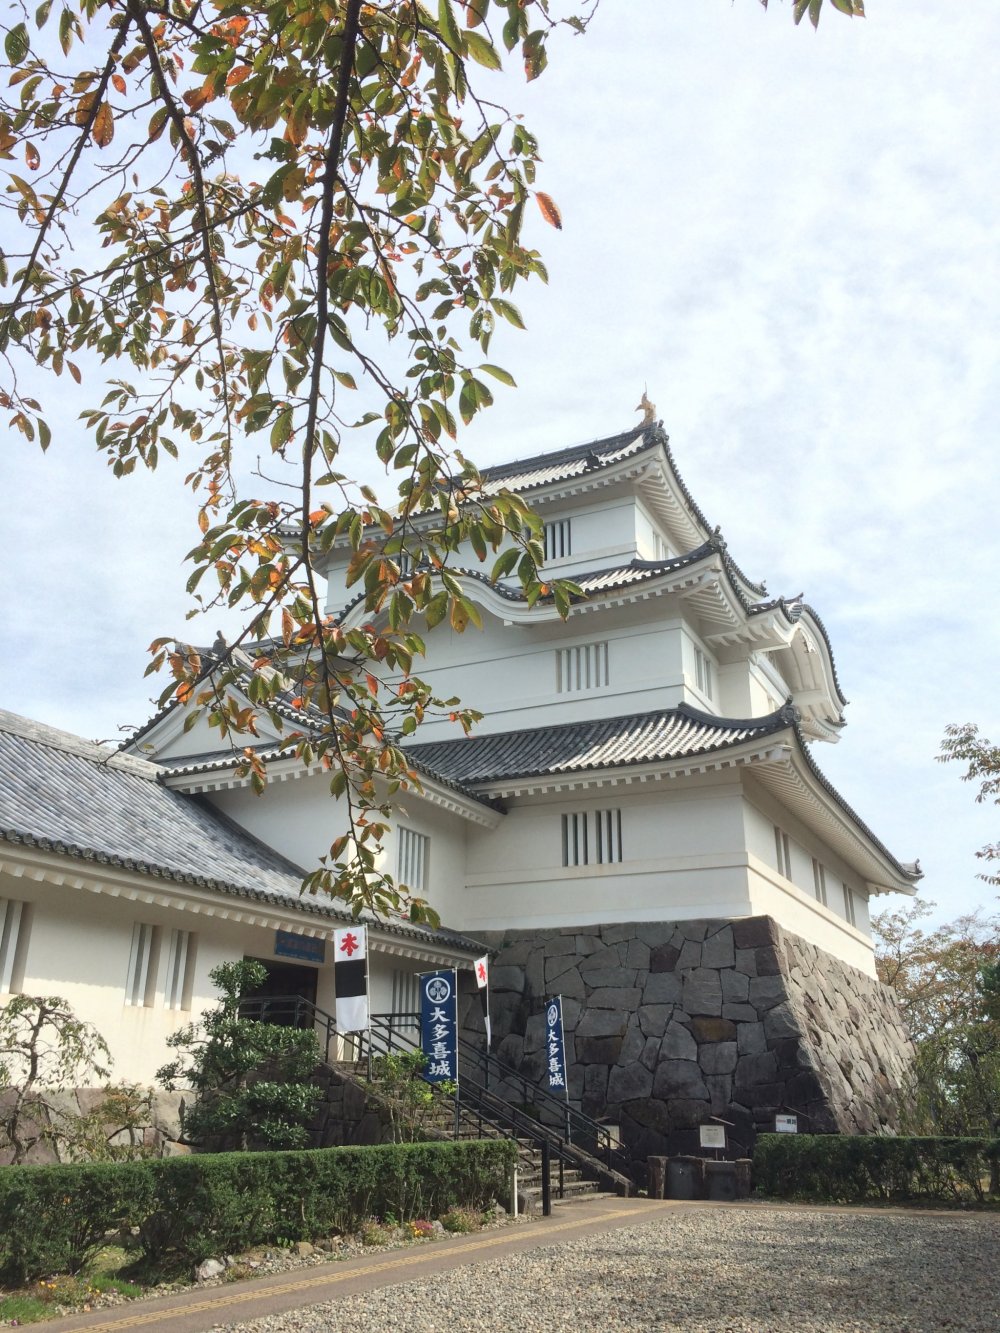 Osaka Castle is located in Otaki town, a small but historic town in Chiba.